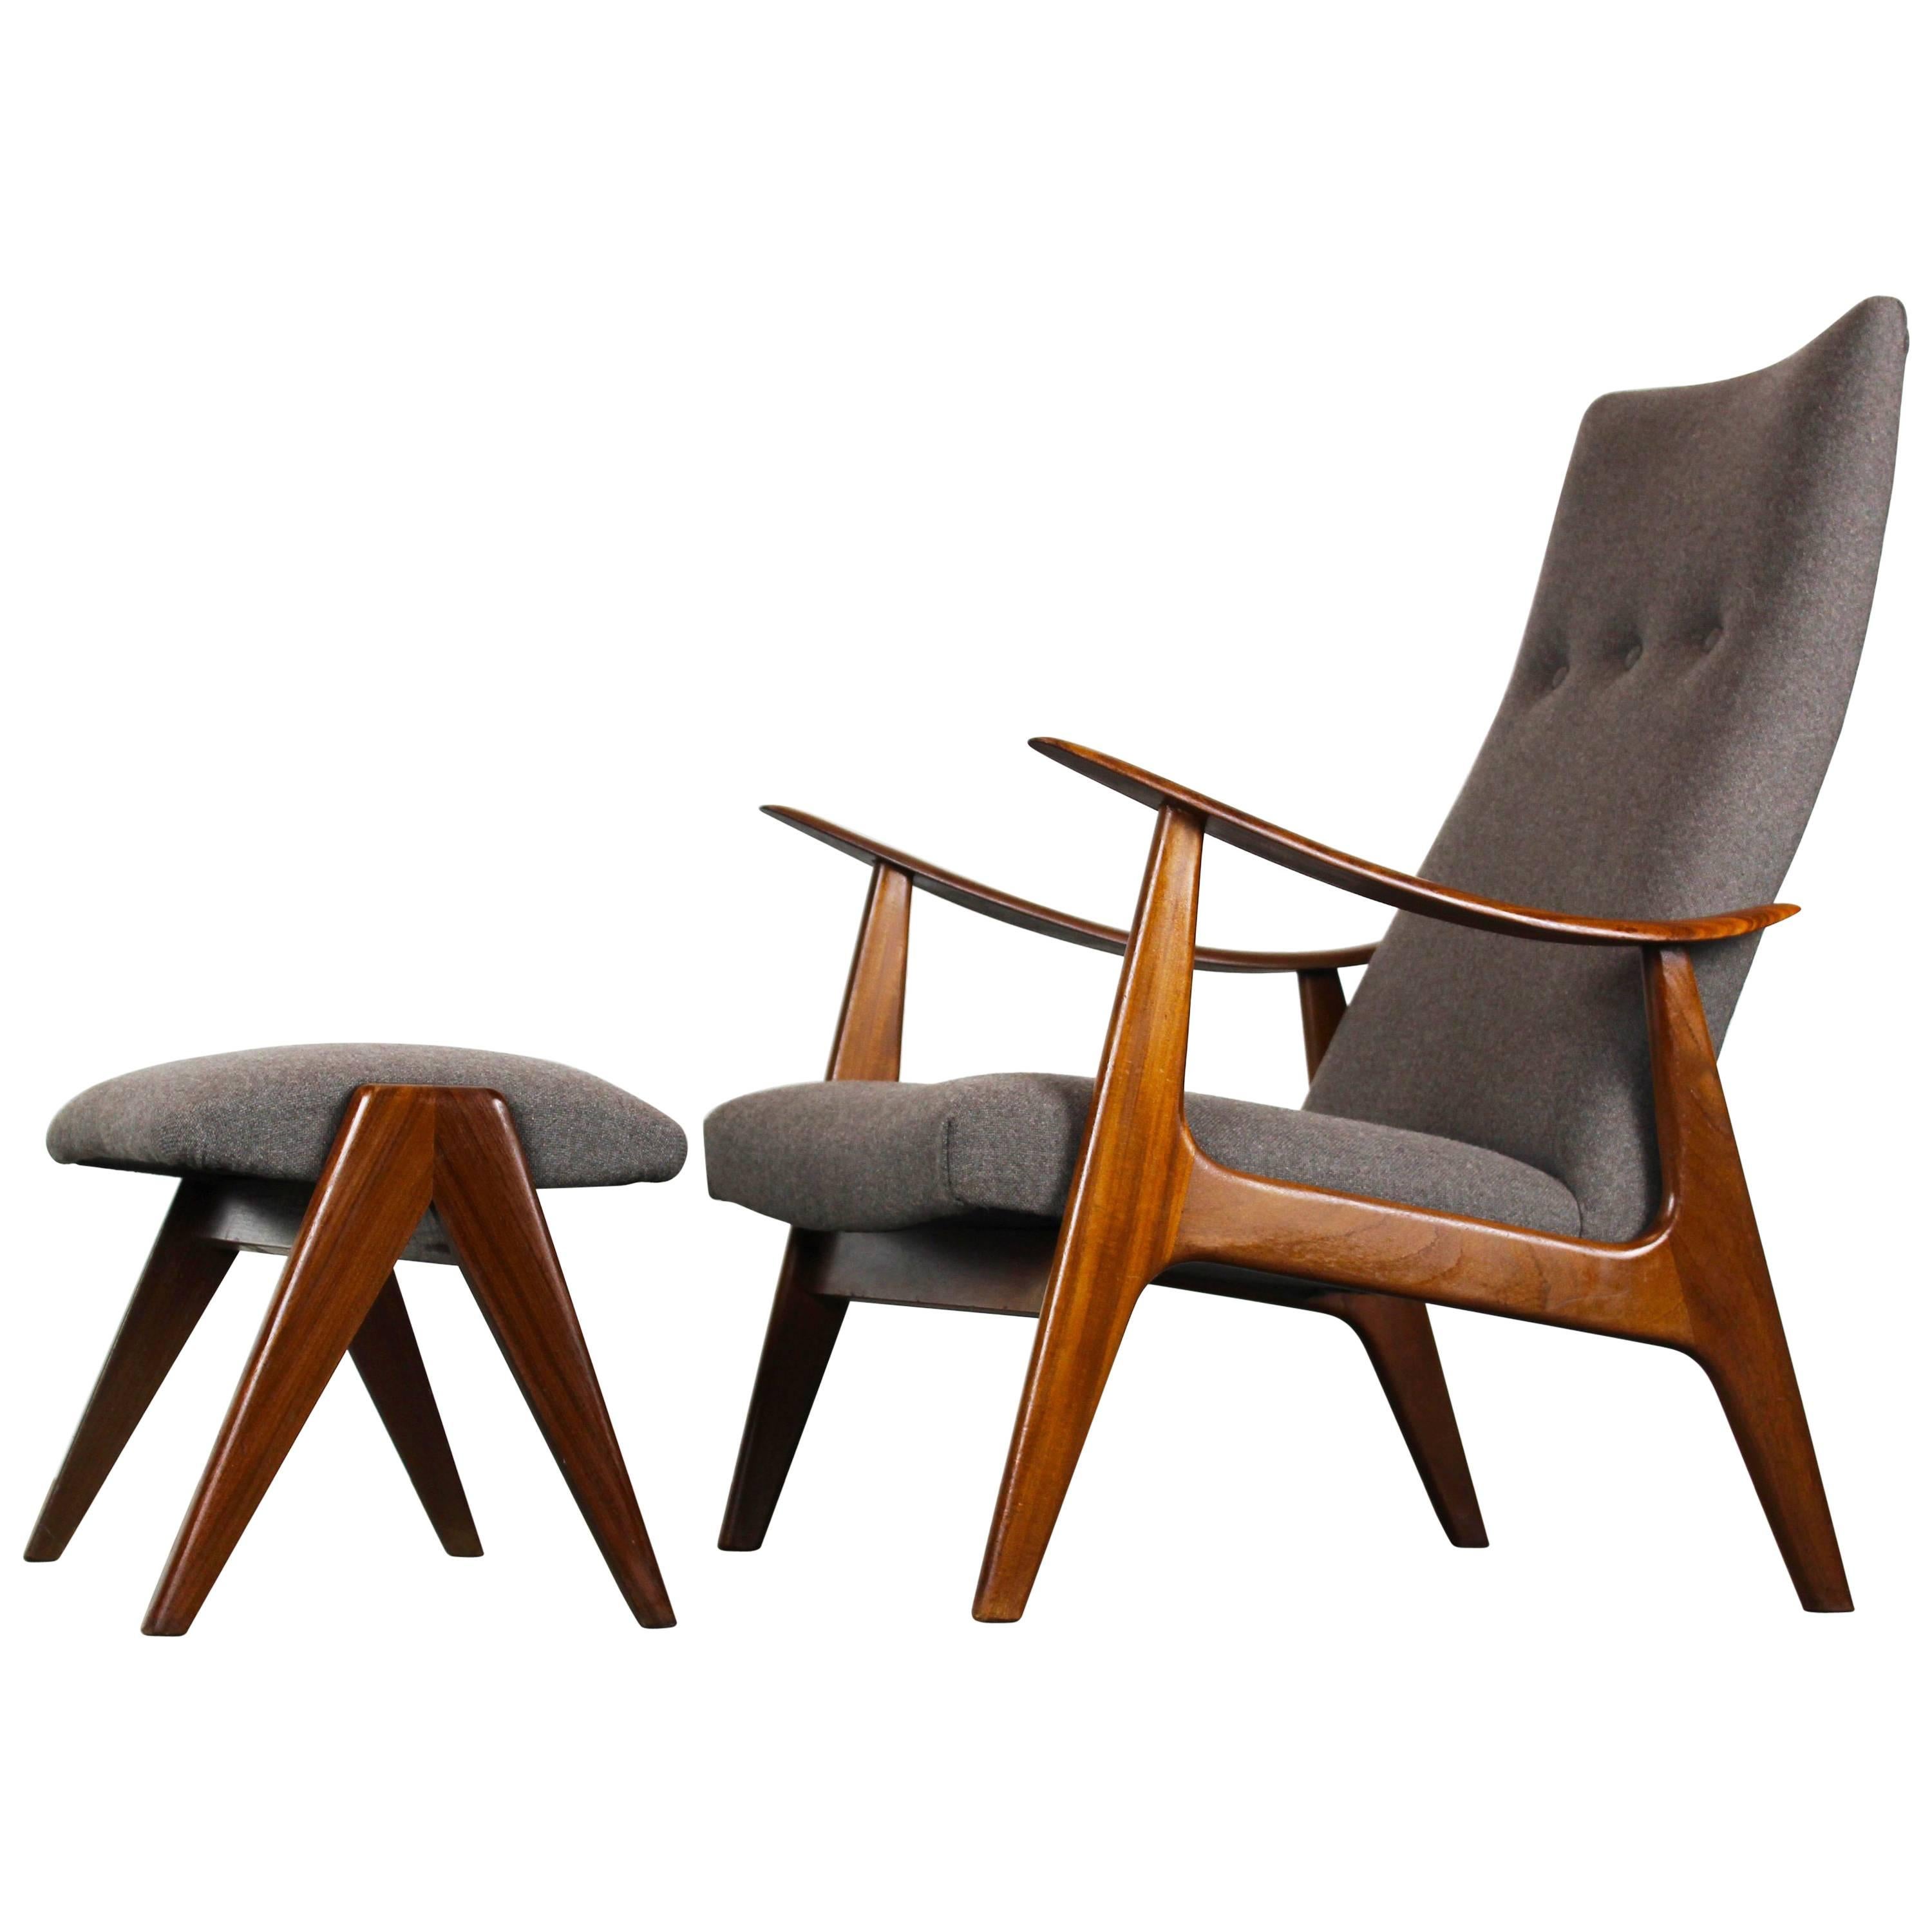 Louis Van Teeffelen Lounge Chair and Ottoman for Webe, 1960, Grey and Brown